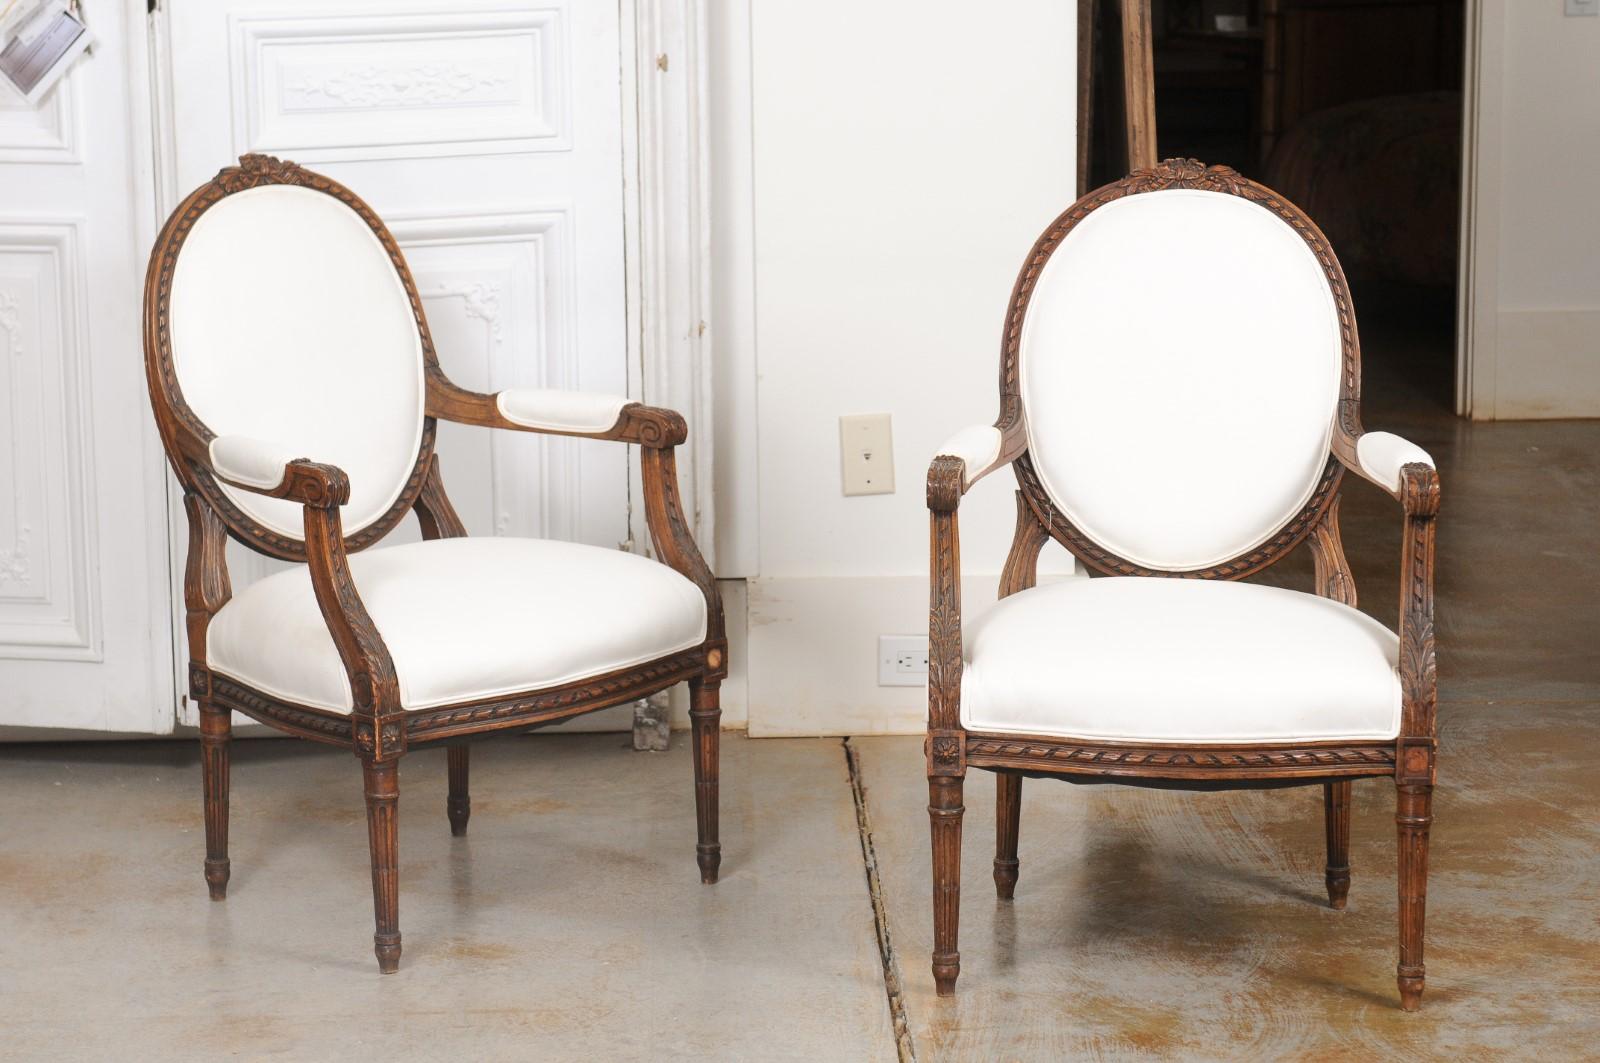 A pair of French Louis XVI style walnut armchairs from the mid-19th century, with oval backs, carved decor and new upholstery. Created in France during the reign of Emperor Napoleon III, this pair of armchairs presents the stylistic characteristics